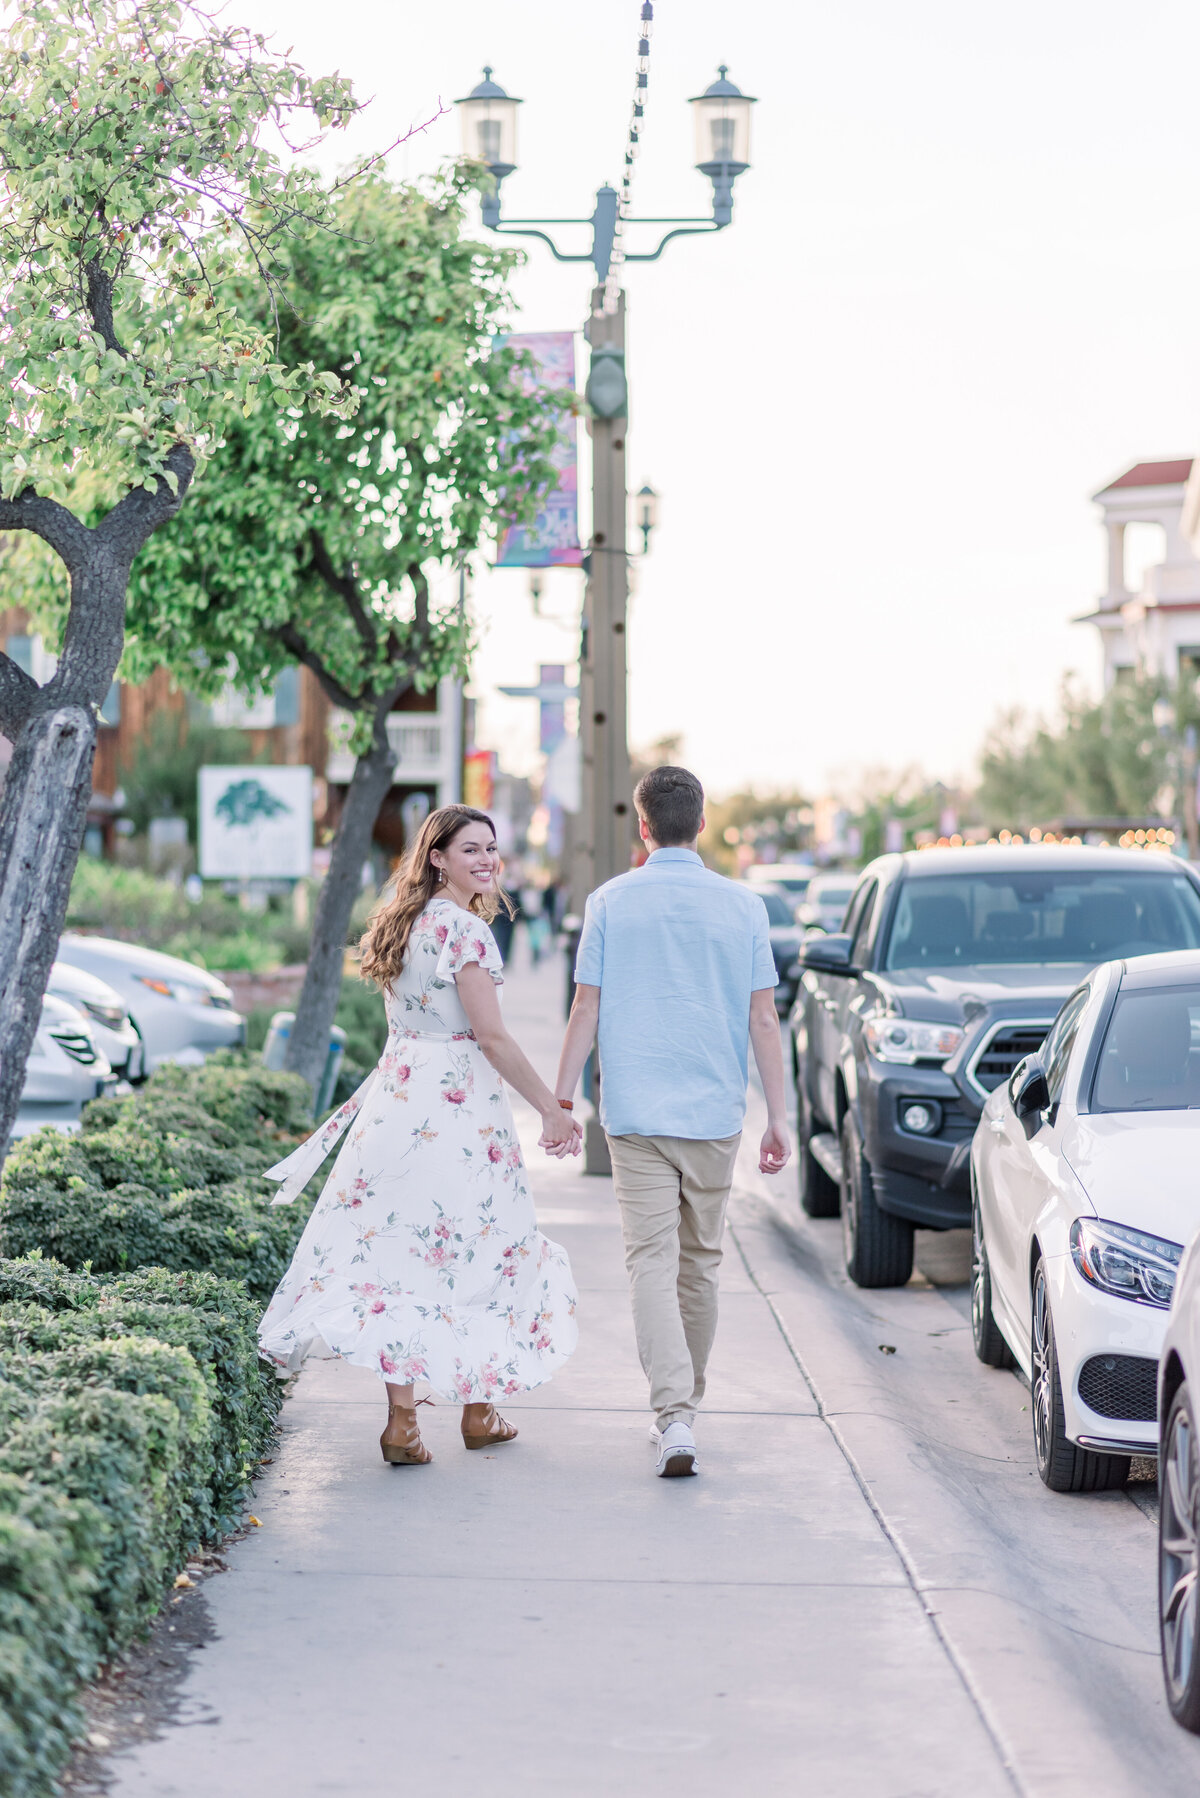 Couple walking in the streets of Temecula. Girl looking over the shoulder.